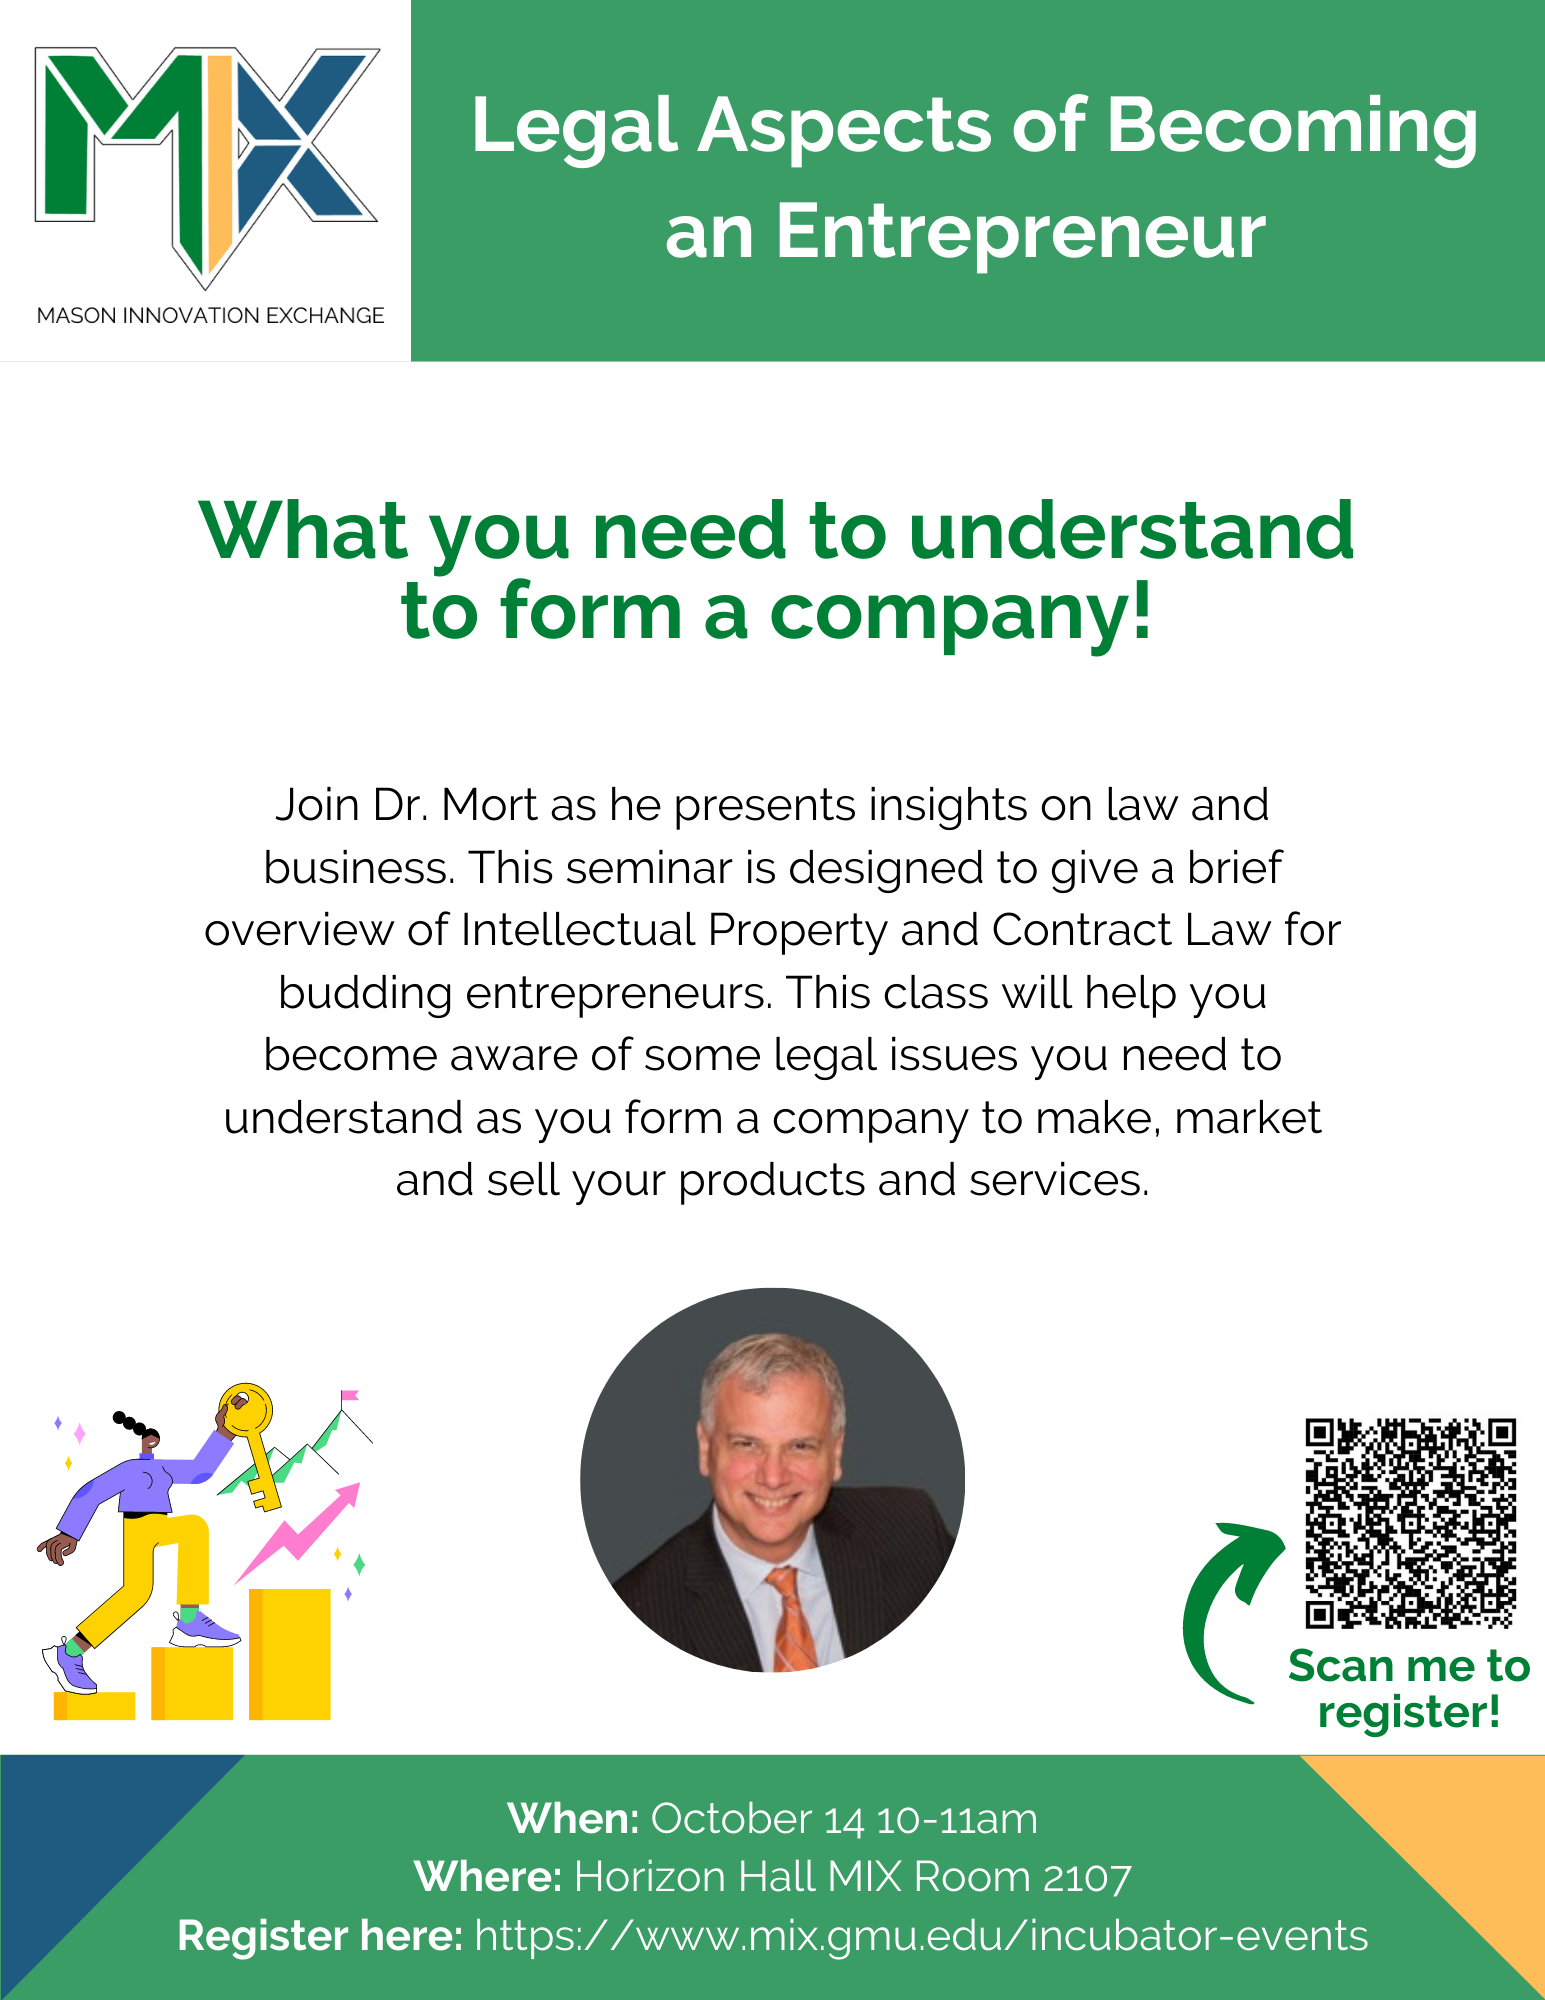 Legal aspects of entrepreneurship at the MIX this Friday